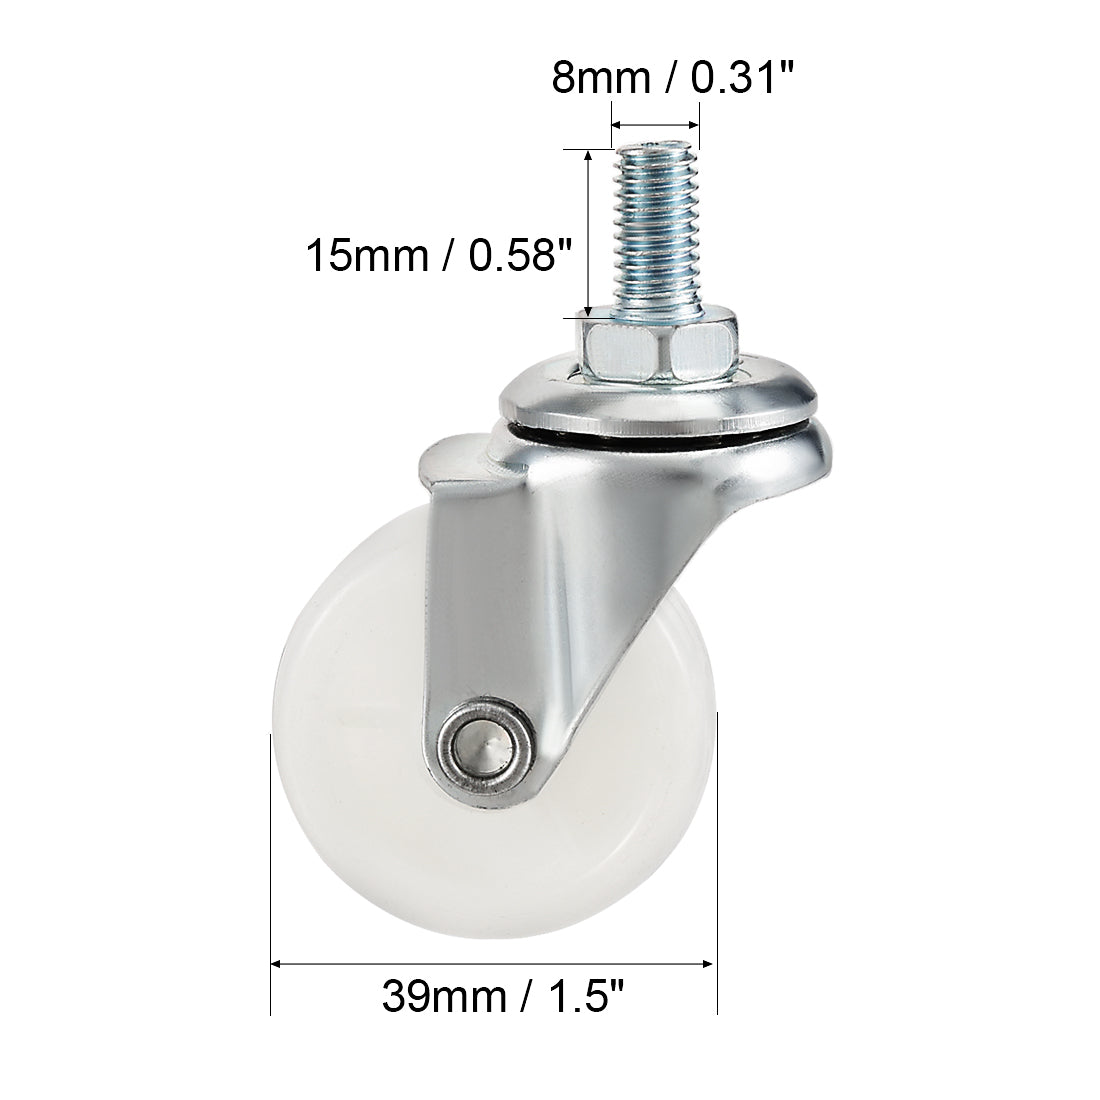 Uxcell Uxcell Swivel Casters 1.5 Inch Nylon 360 Degree M8 x 15mm Threaded Caster Wheels White 44lb Capacity 2 Pcs